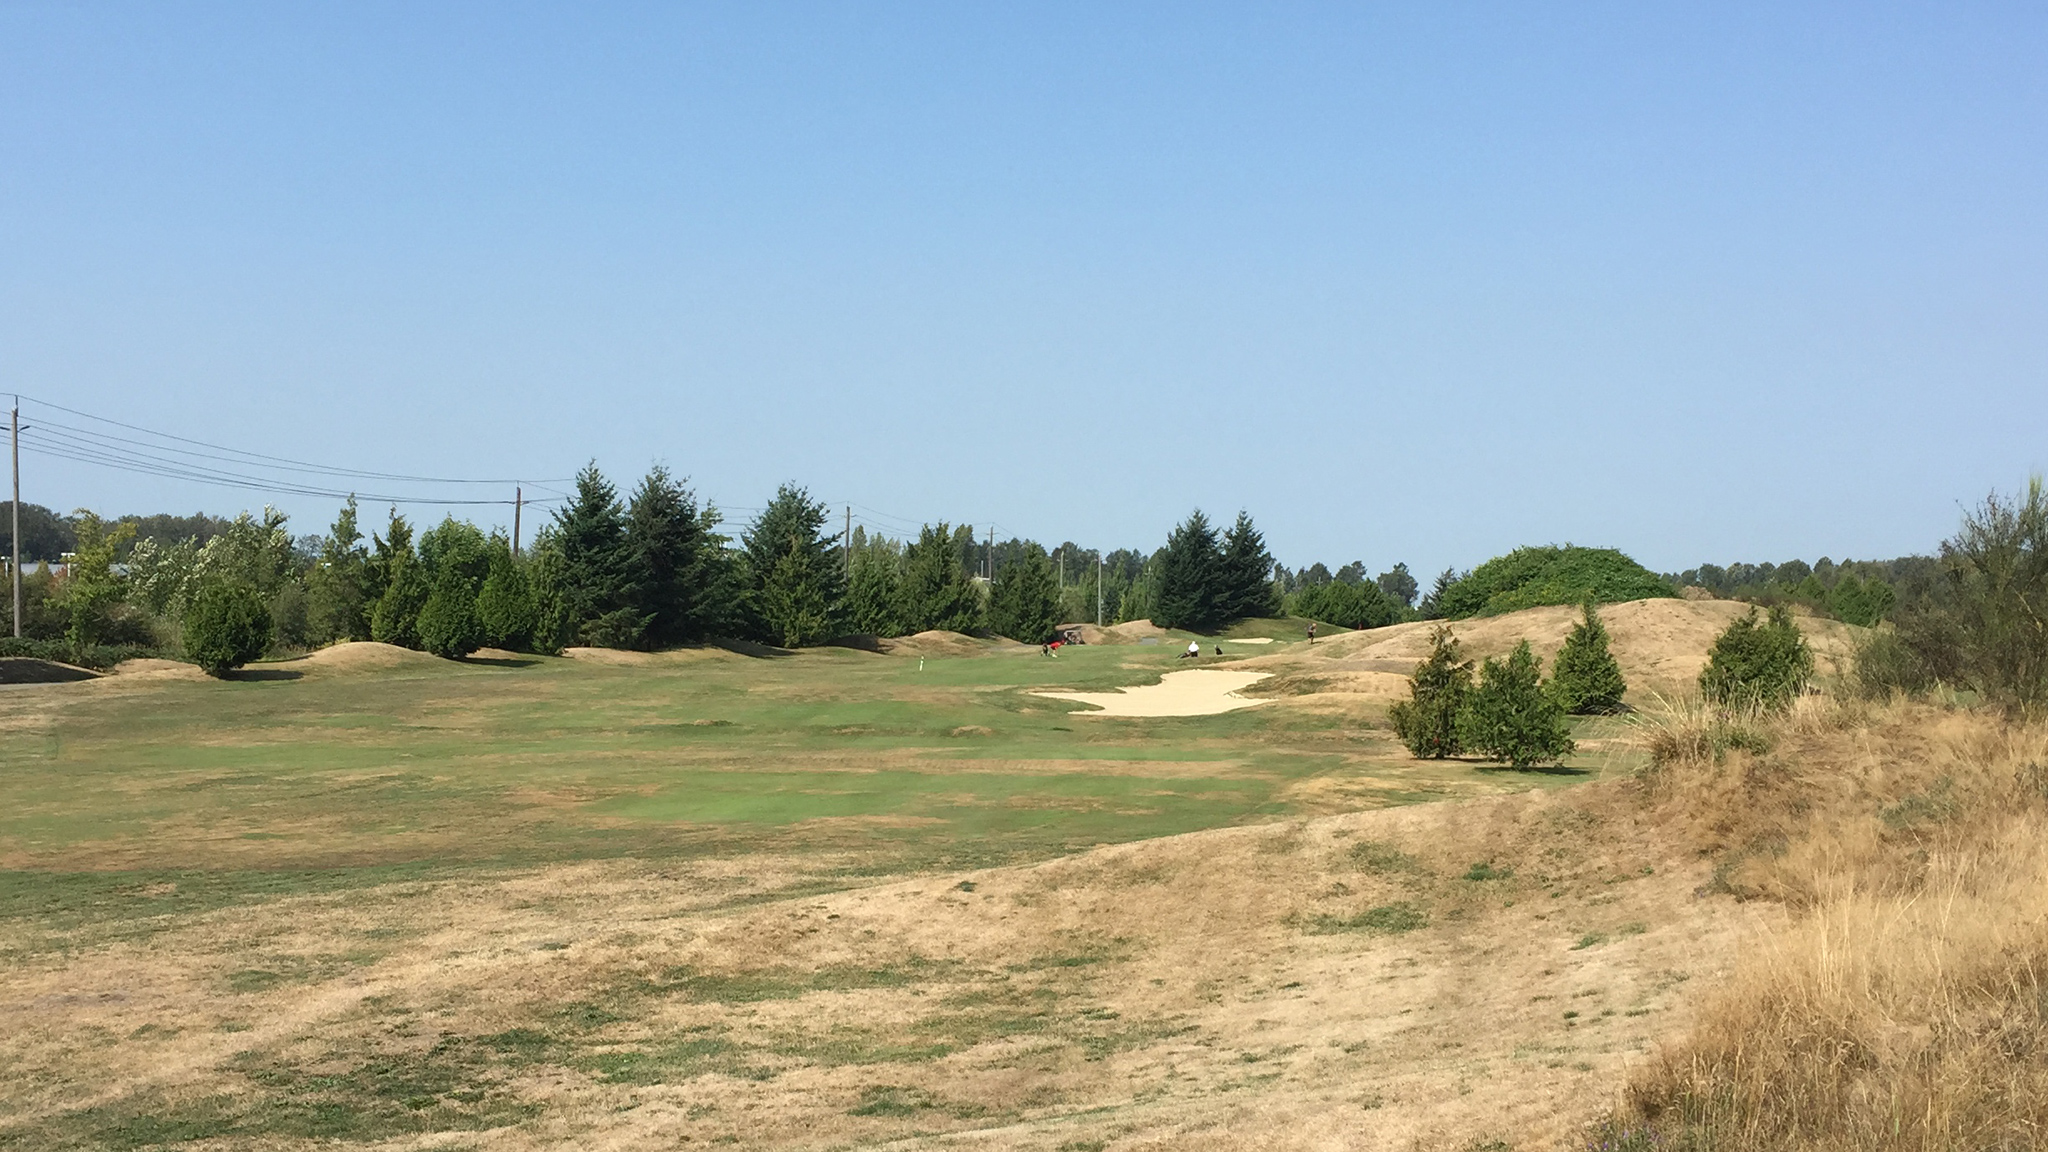 ALLIED GOLF ASSOCIATION – BRITISH COLUMBIA STATEMENT REGARDING SUPPORT OF WATER USE RESTRICTIONS